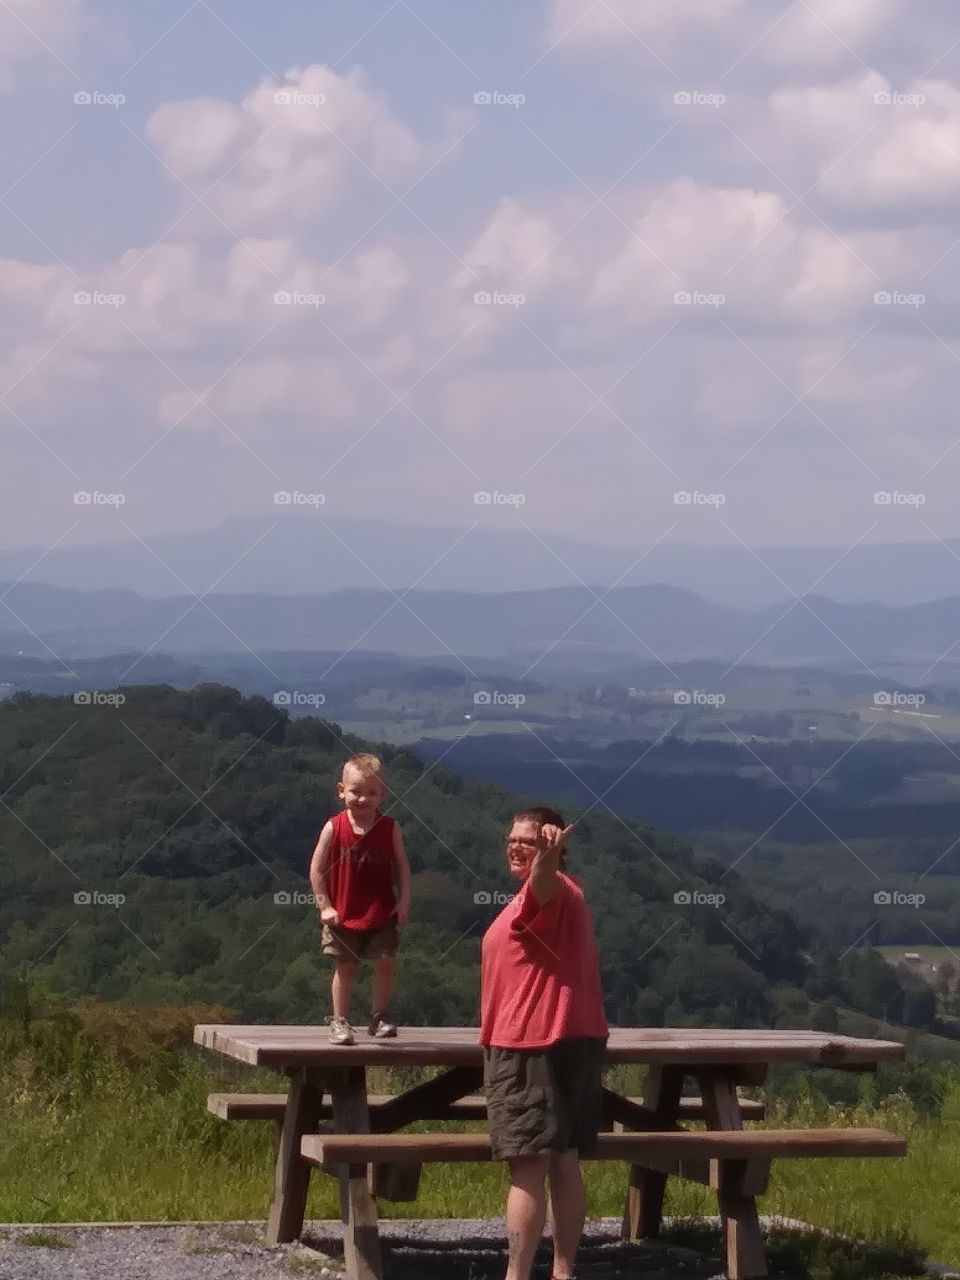 son and mother enjoying nature